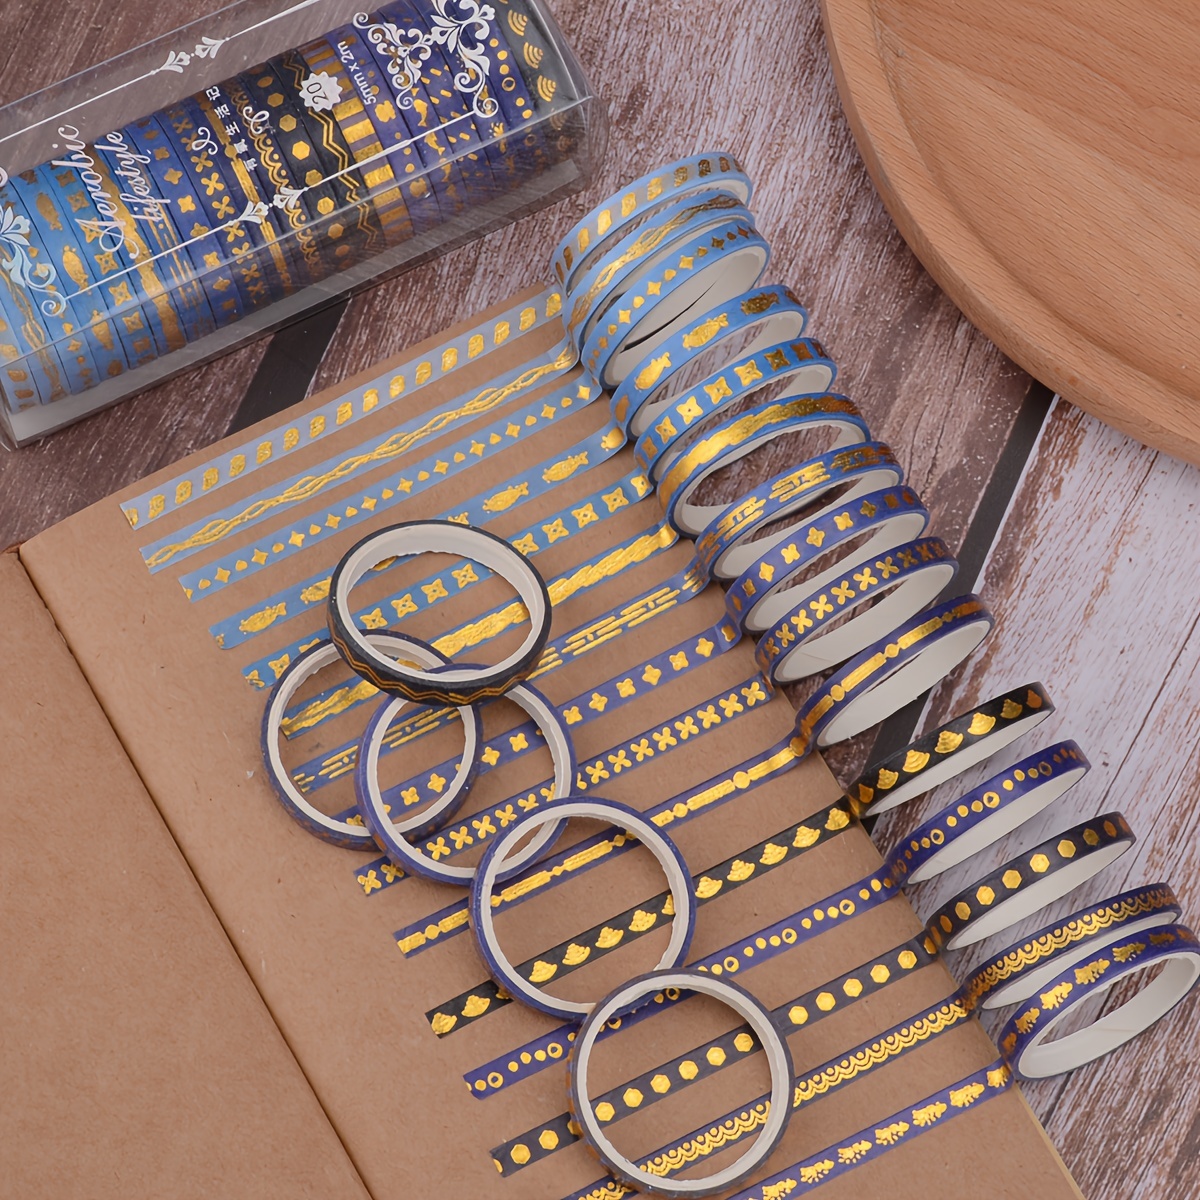 Vintage Washi Tape In A Box, From The Vintage Stamp Series